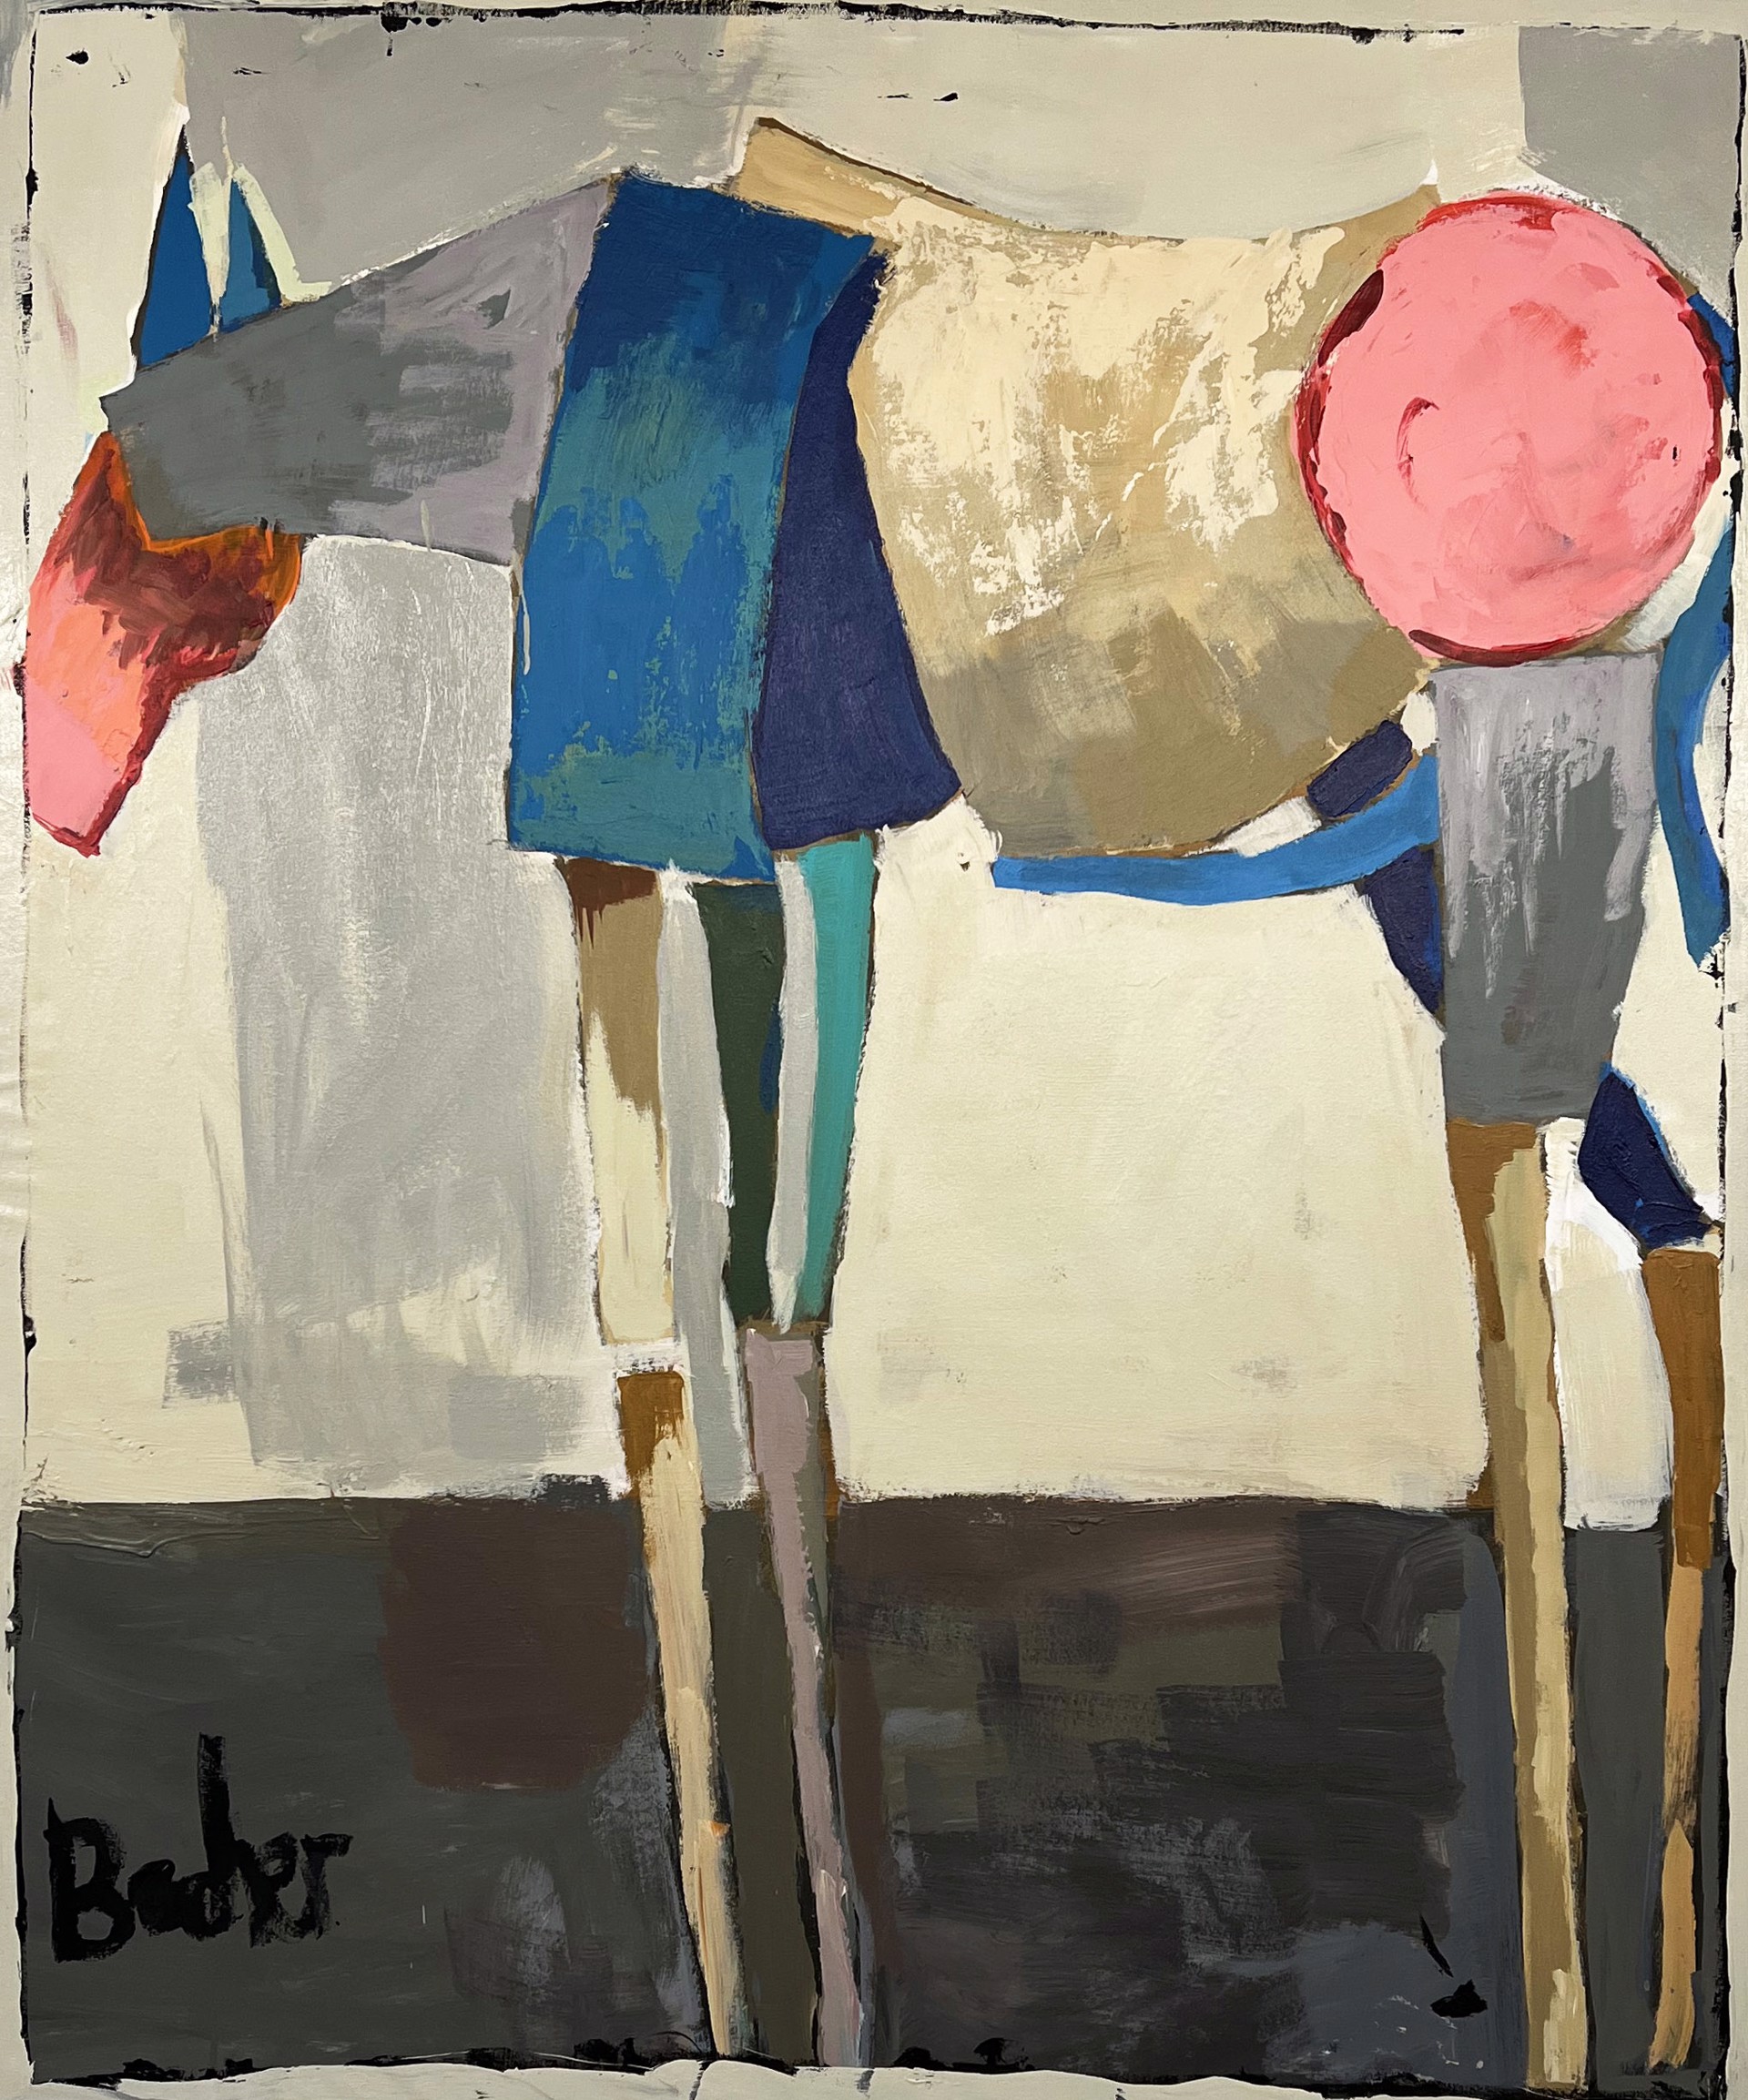 A Painted Horse by Gary Bodner